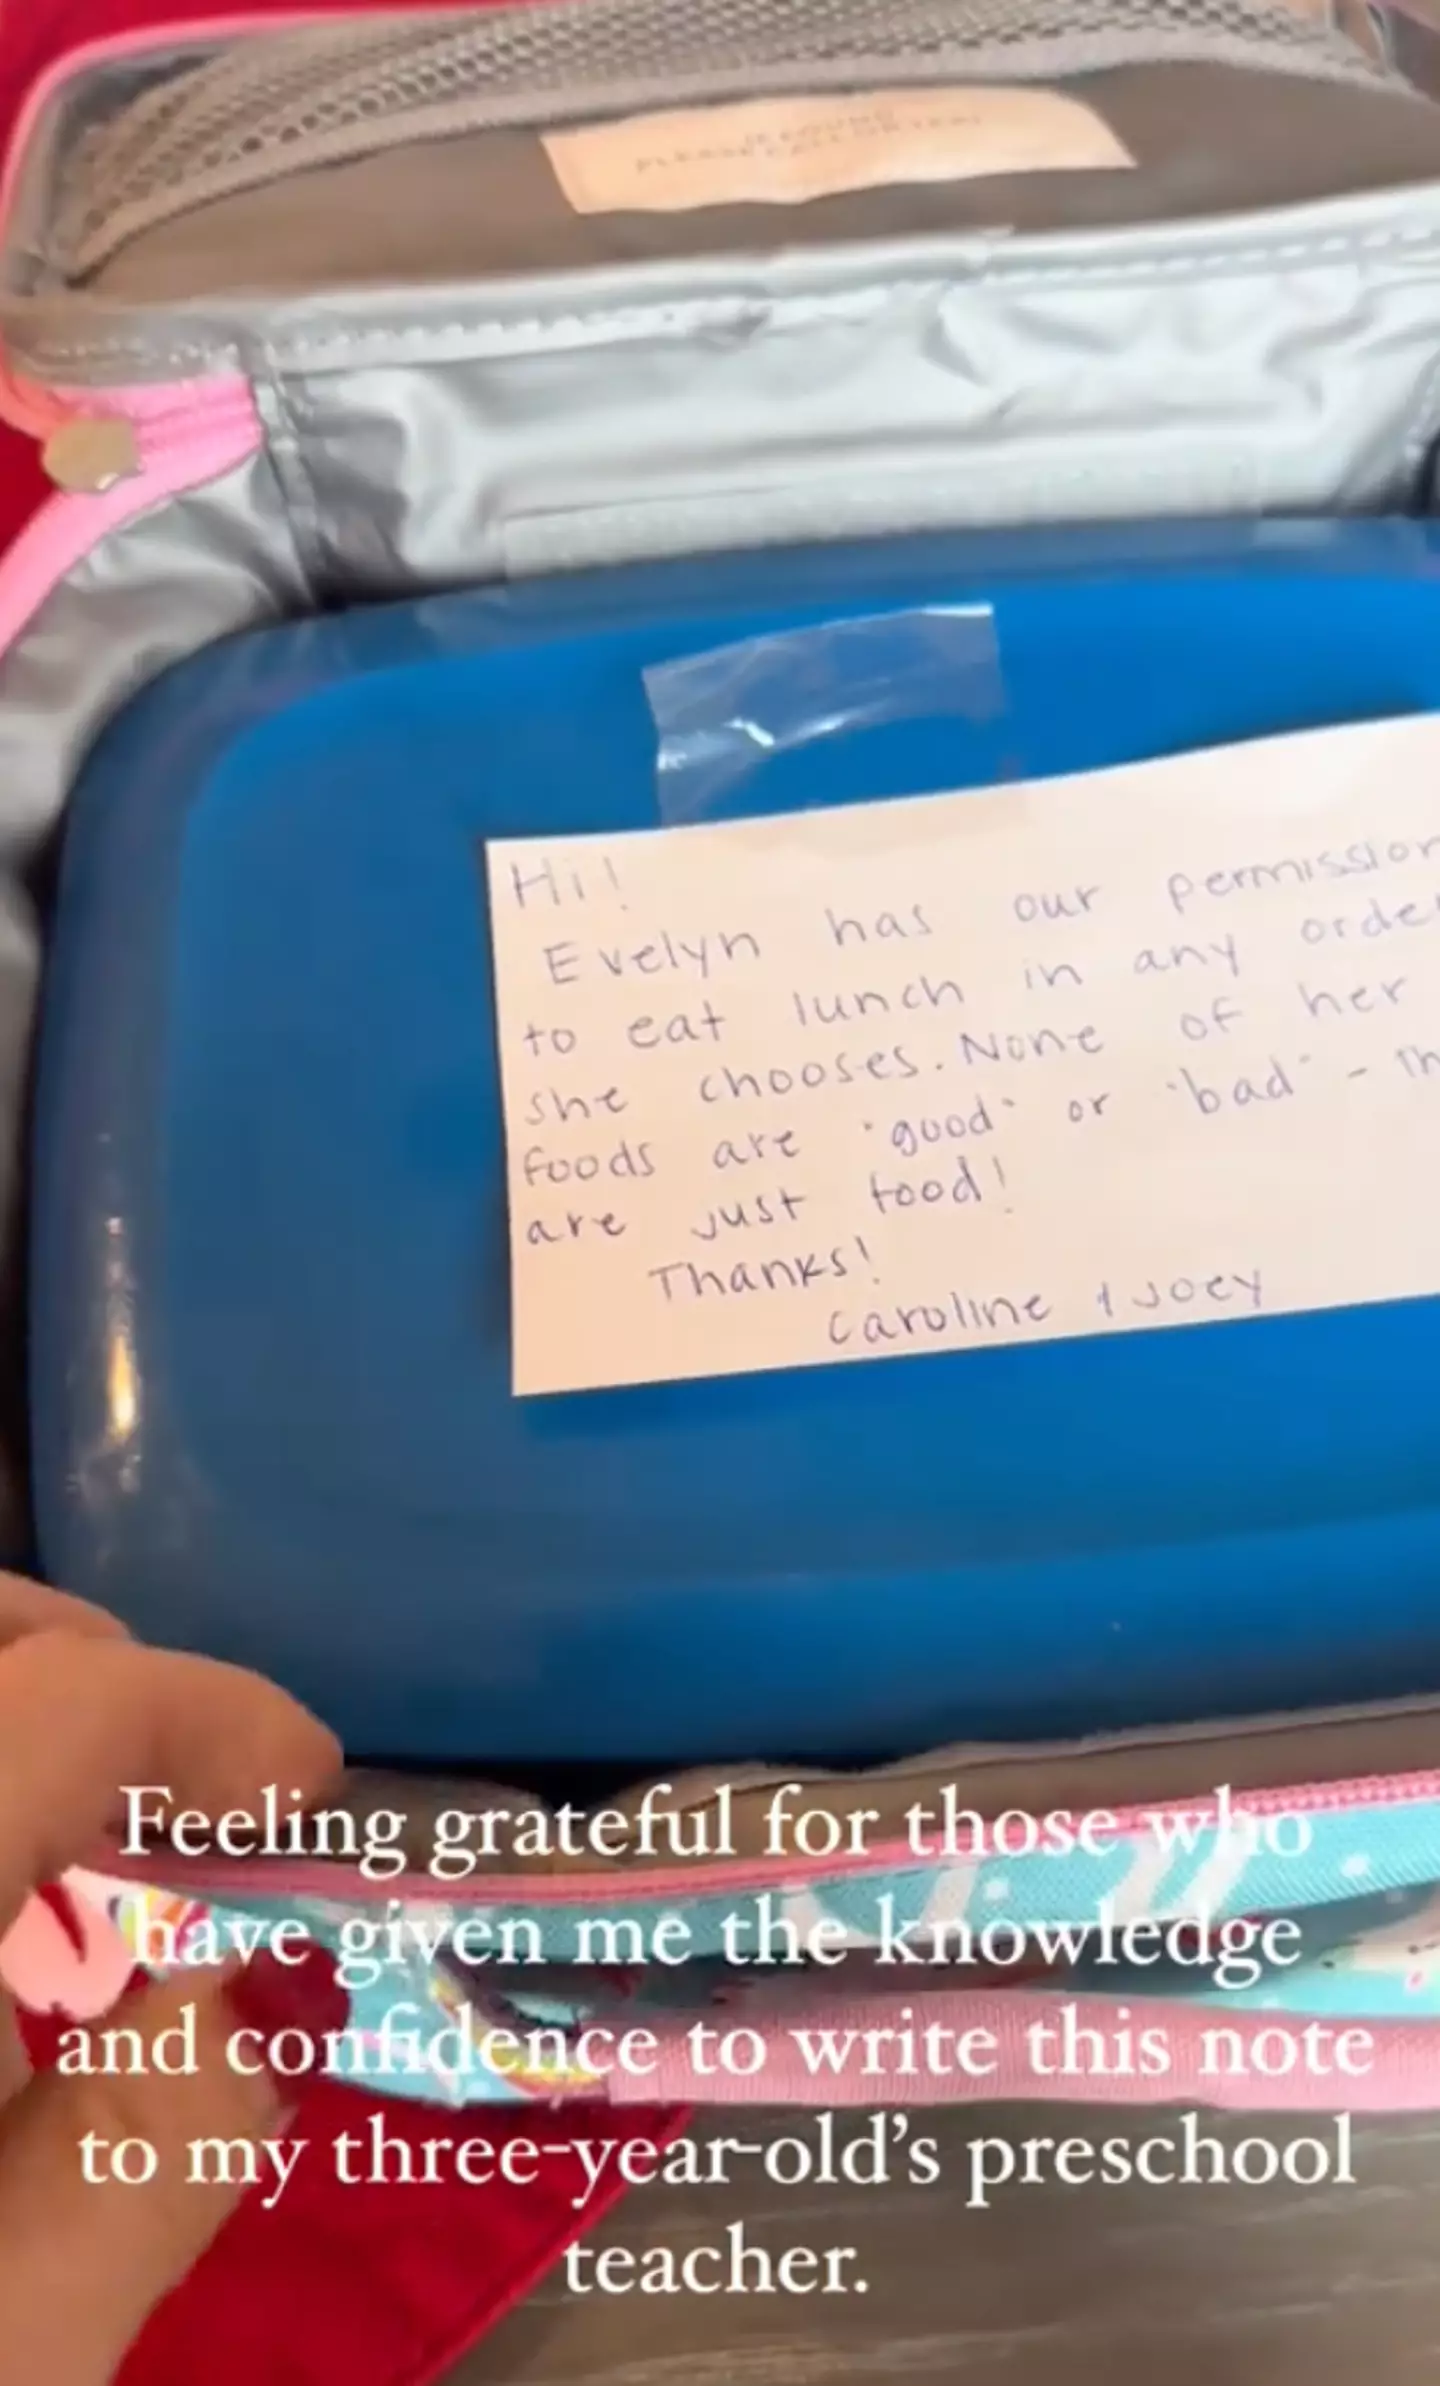 The mum left the note in her daughter's lunchbox. TikTok/@pezzi.shop